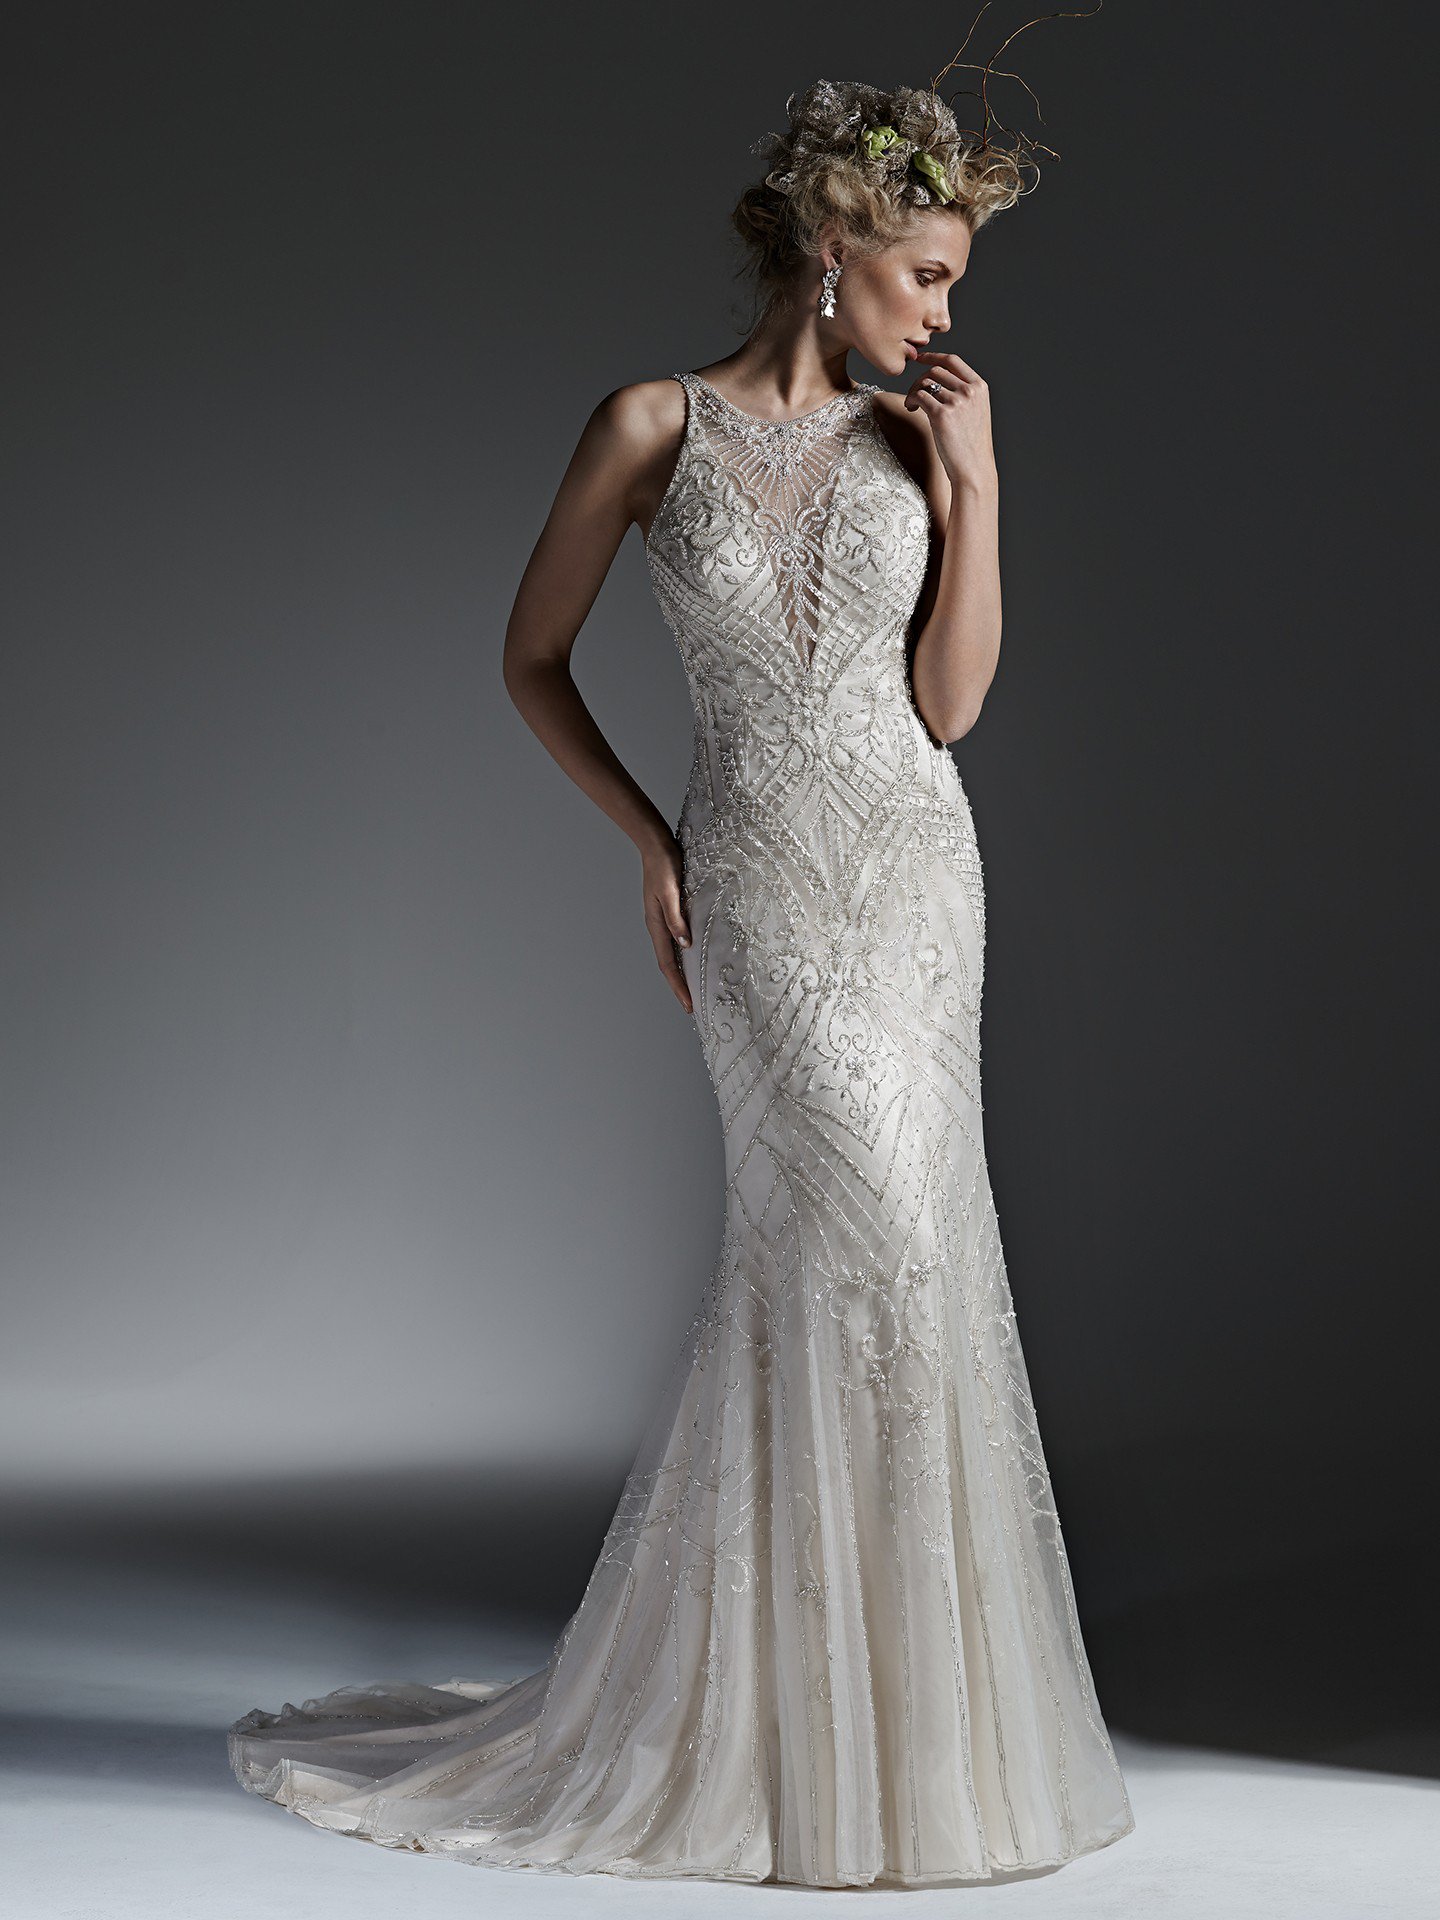 Sheath Wedding Dresses With Crystals Dresses Images 2022 1906